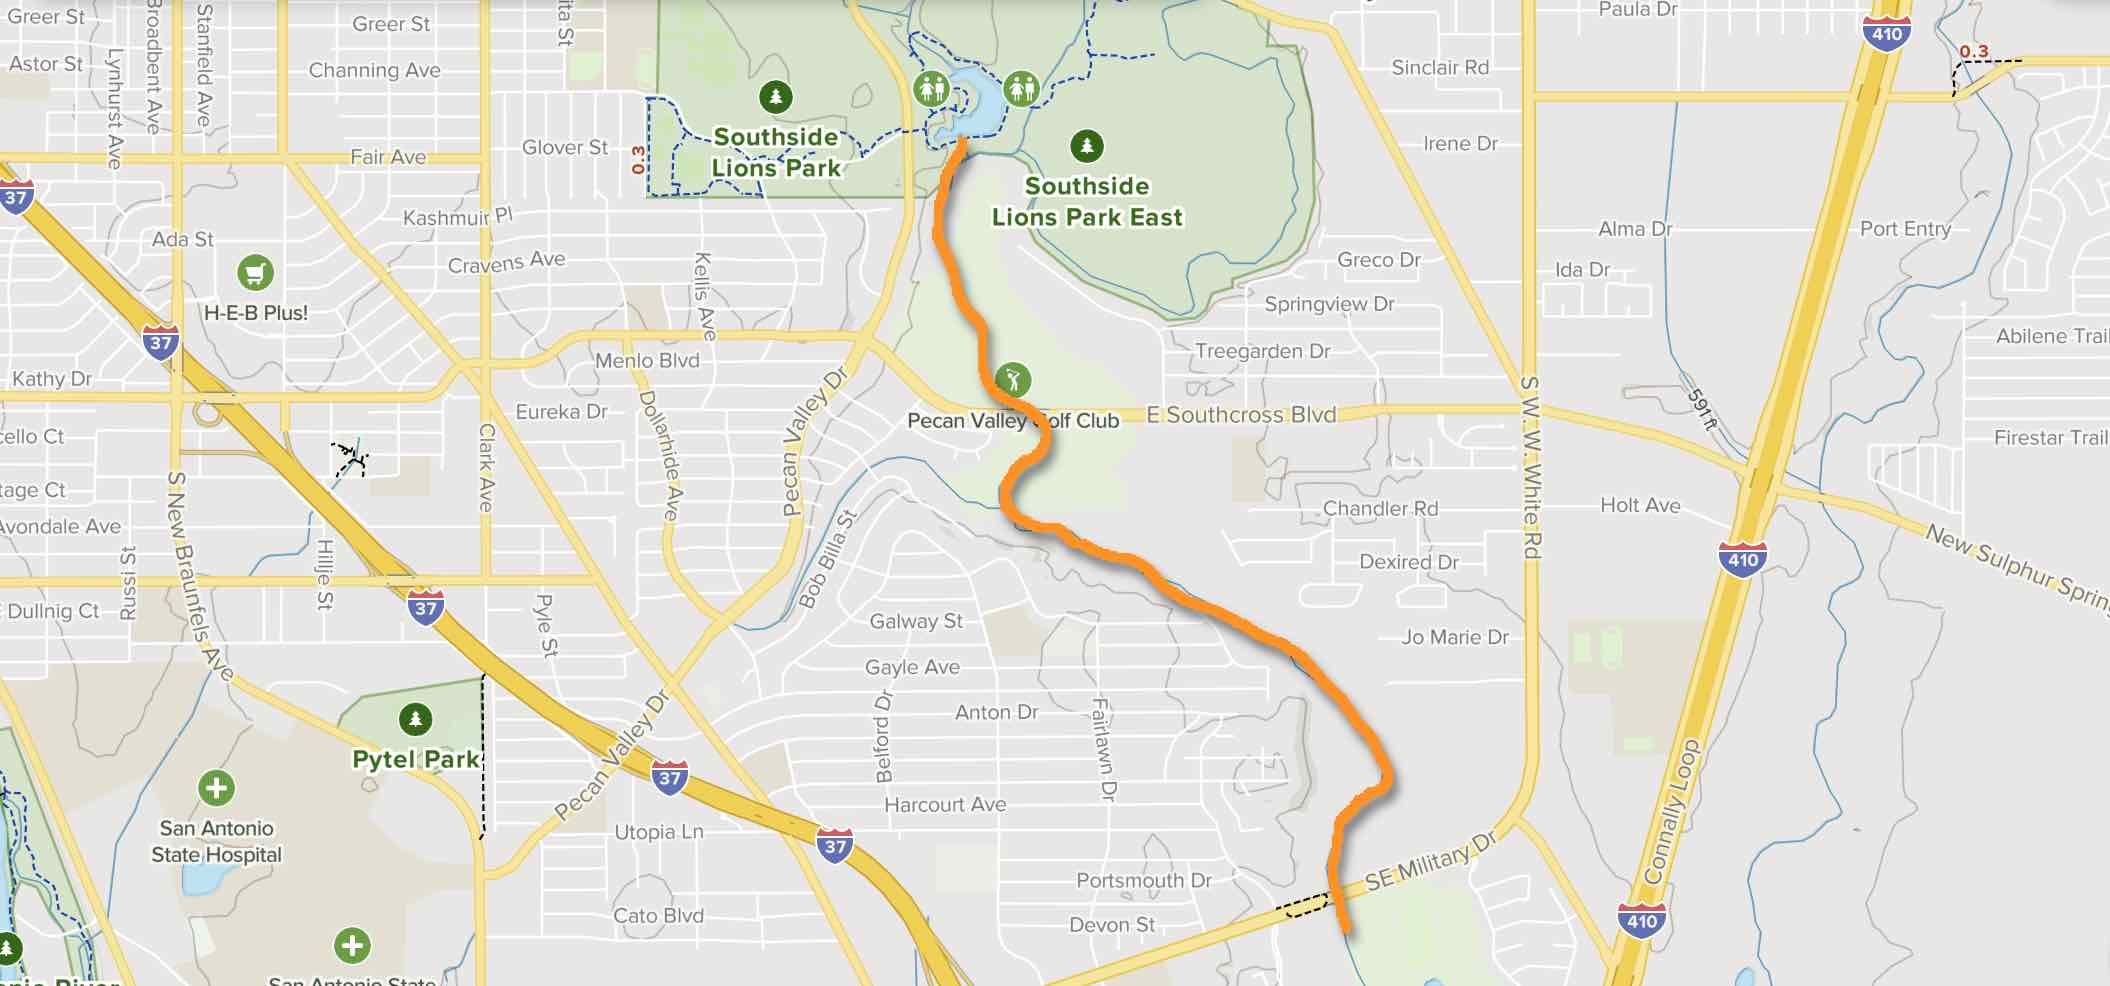 Projected trail illustrates how it will connect Southside Lions Park to S.E. Military—Maps: AllTrails.com, Graphics: SRR